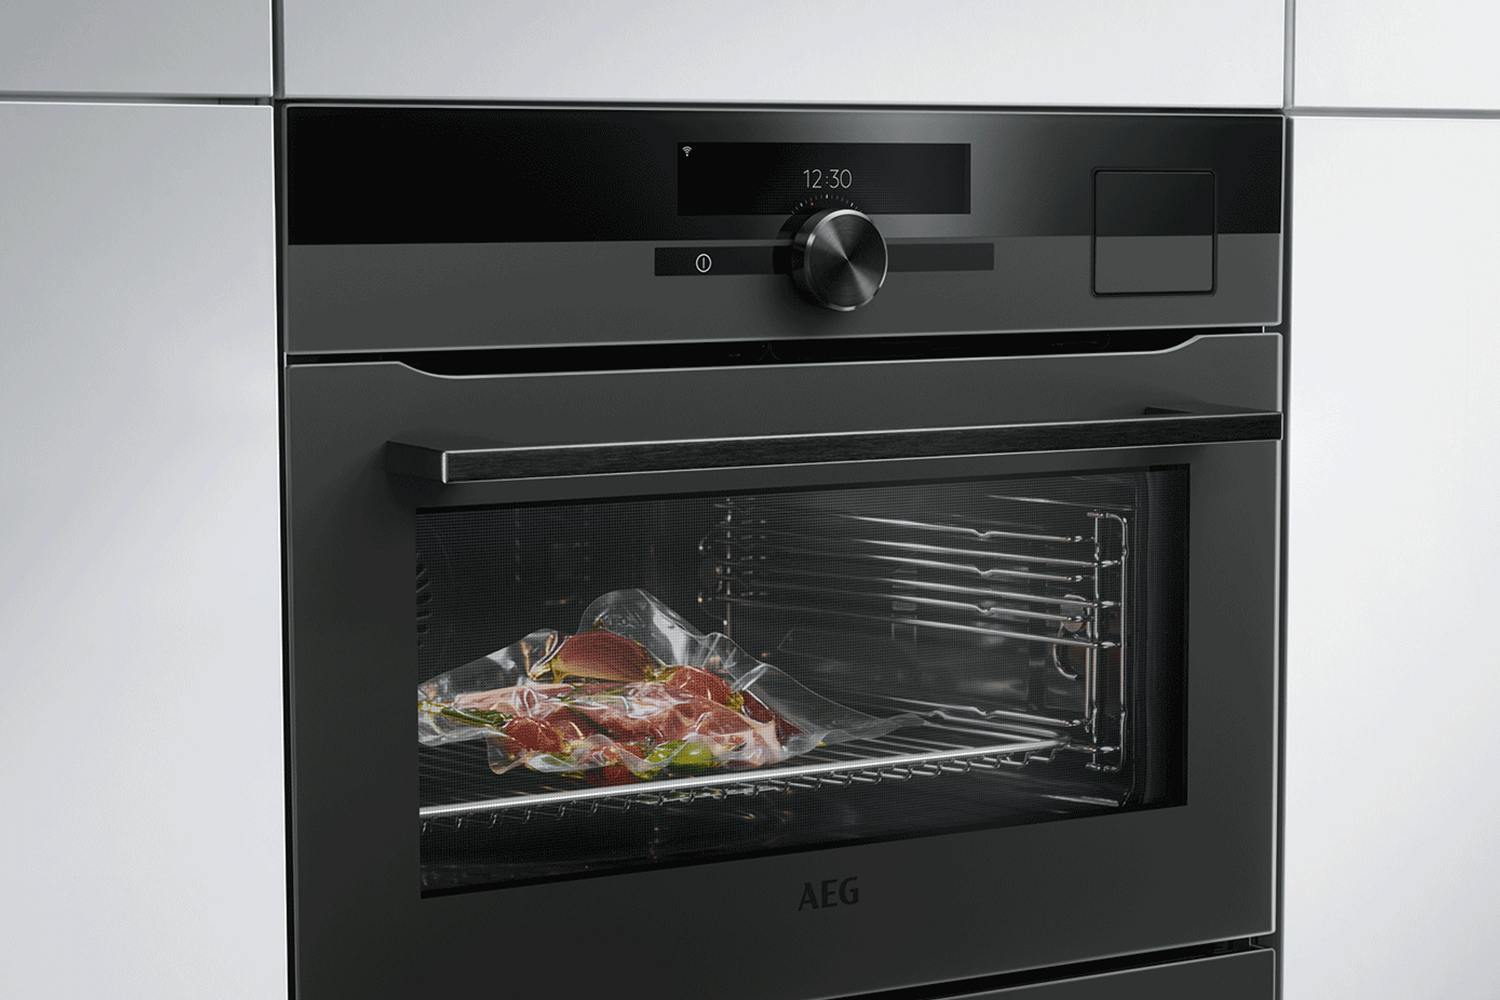 AEG 45cm SteamPro Compact Oven